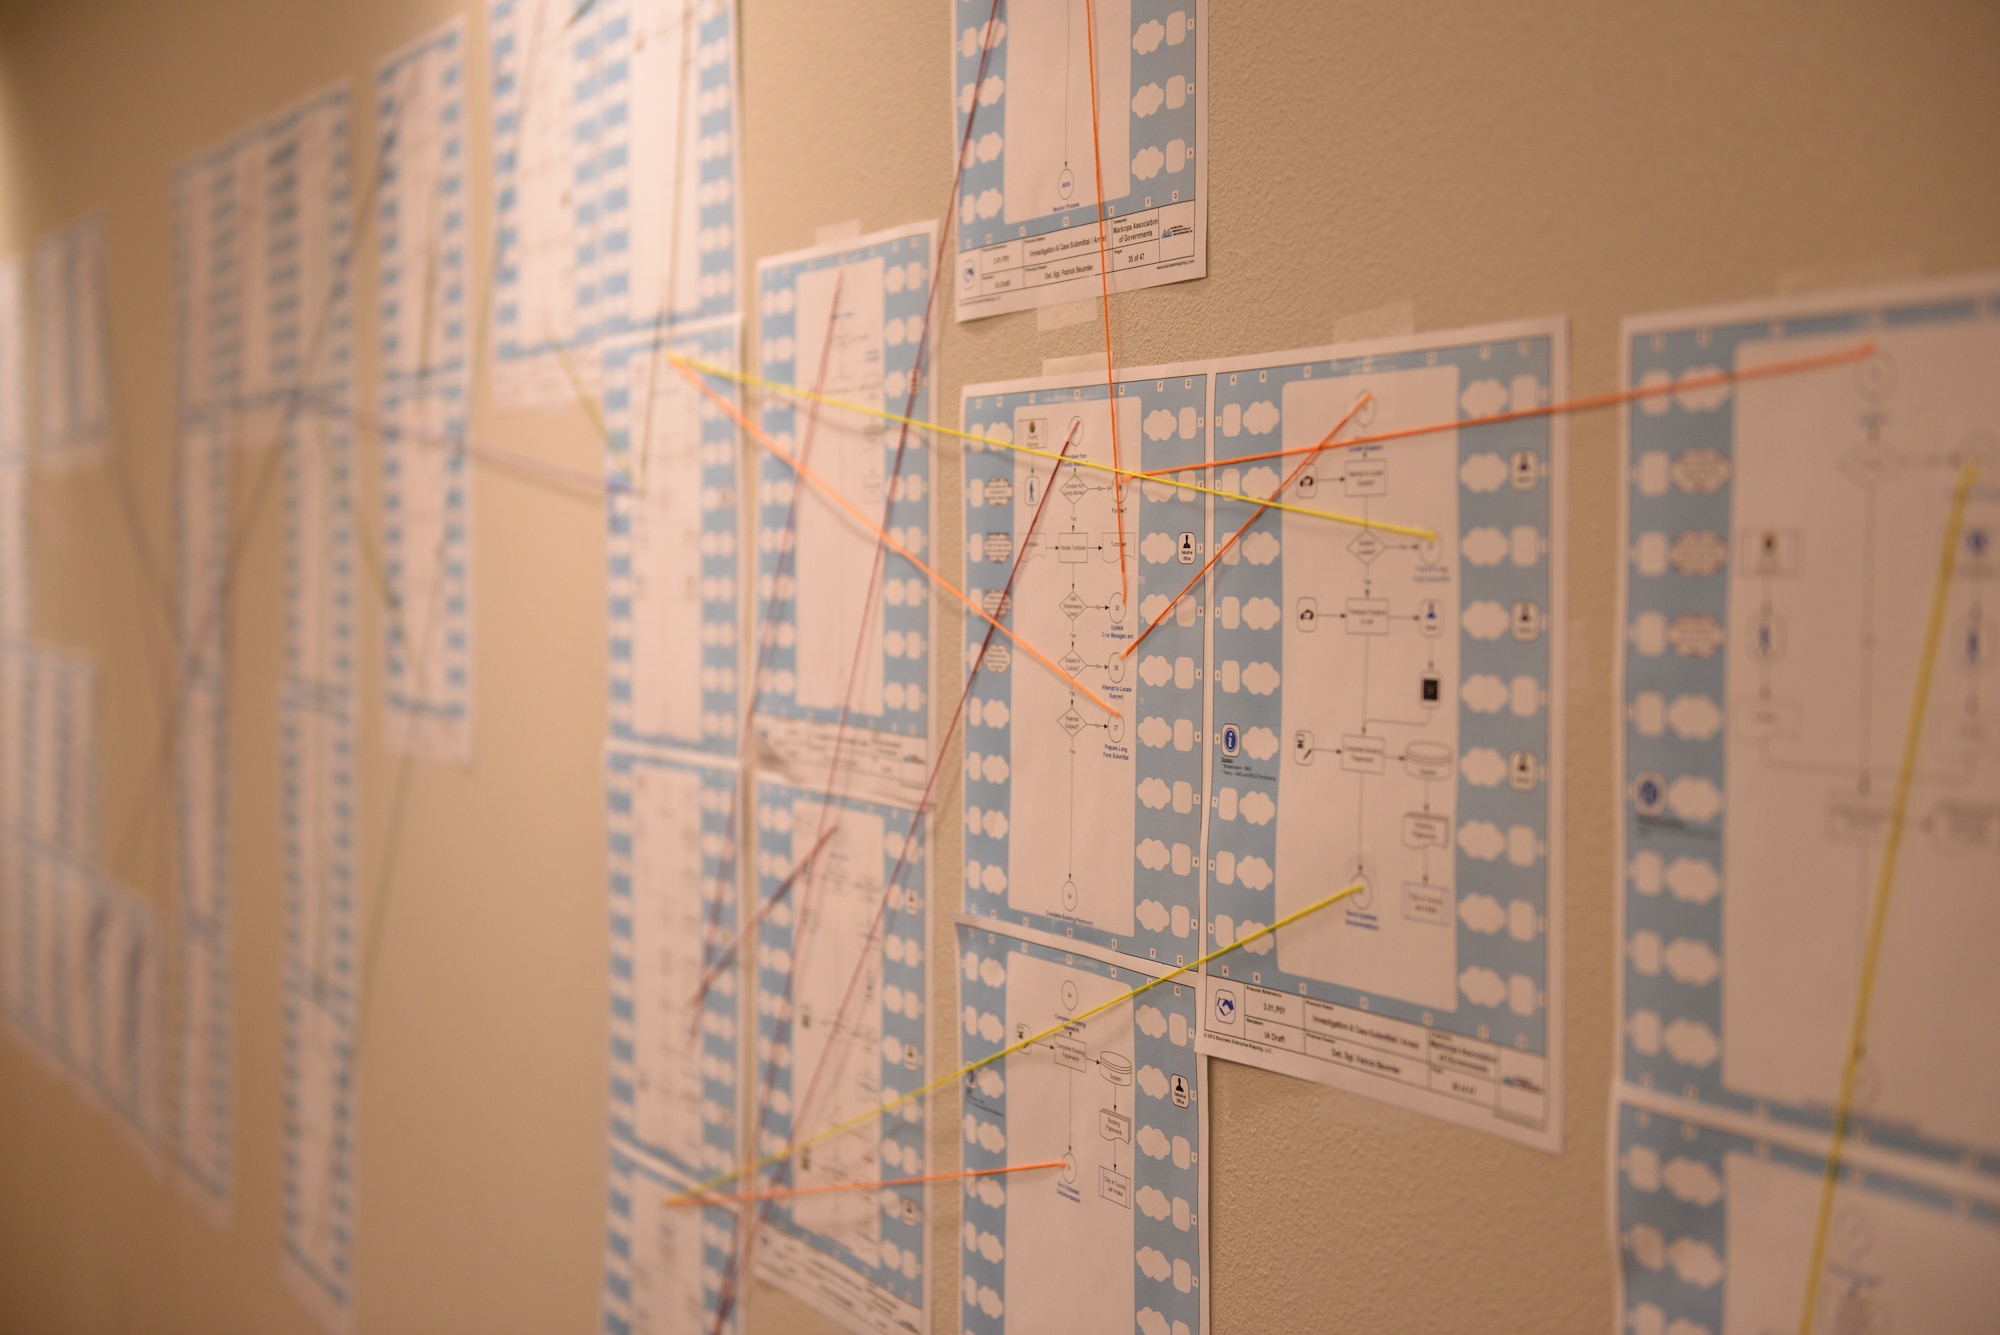 A map of procedures outlining the processes detailing the handling of domestic violence and abuse cases adorns a wall in the Glendale Family Advocacy Center, Nov. 5. The Glendale FAC is an extension of the city police department. (U.S. Air Force photo by Airman 1st Class Ridge Shan)